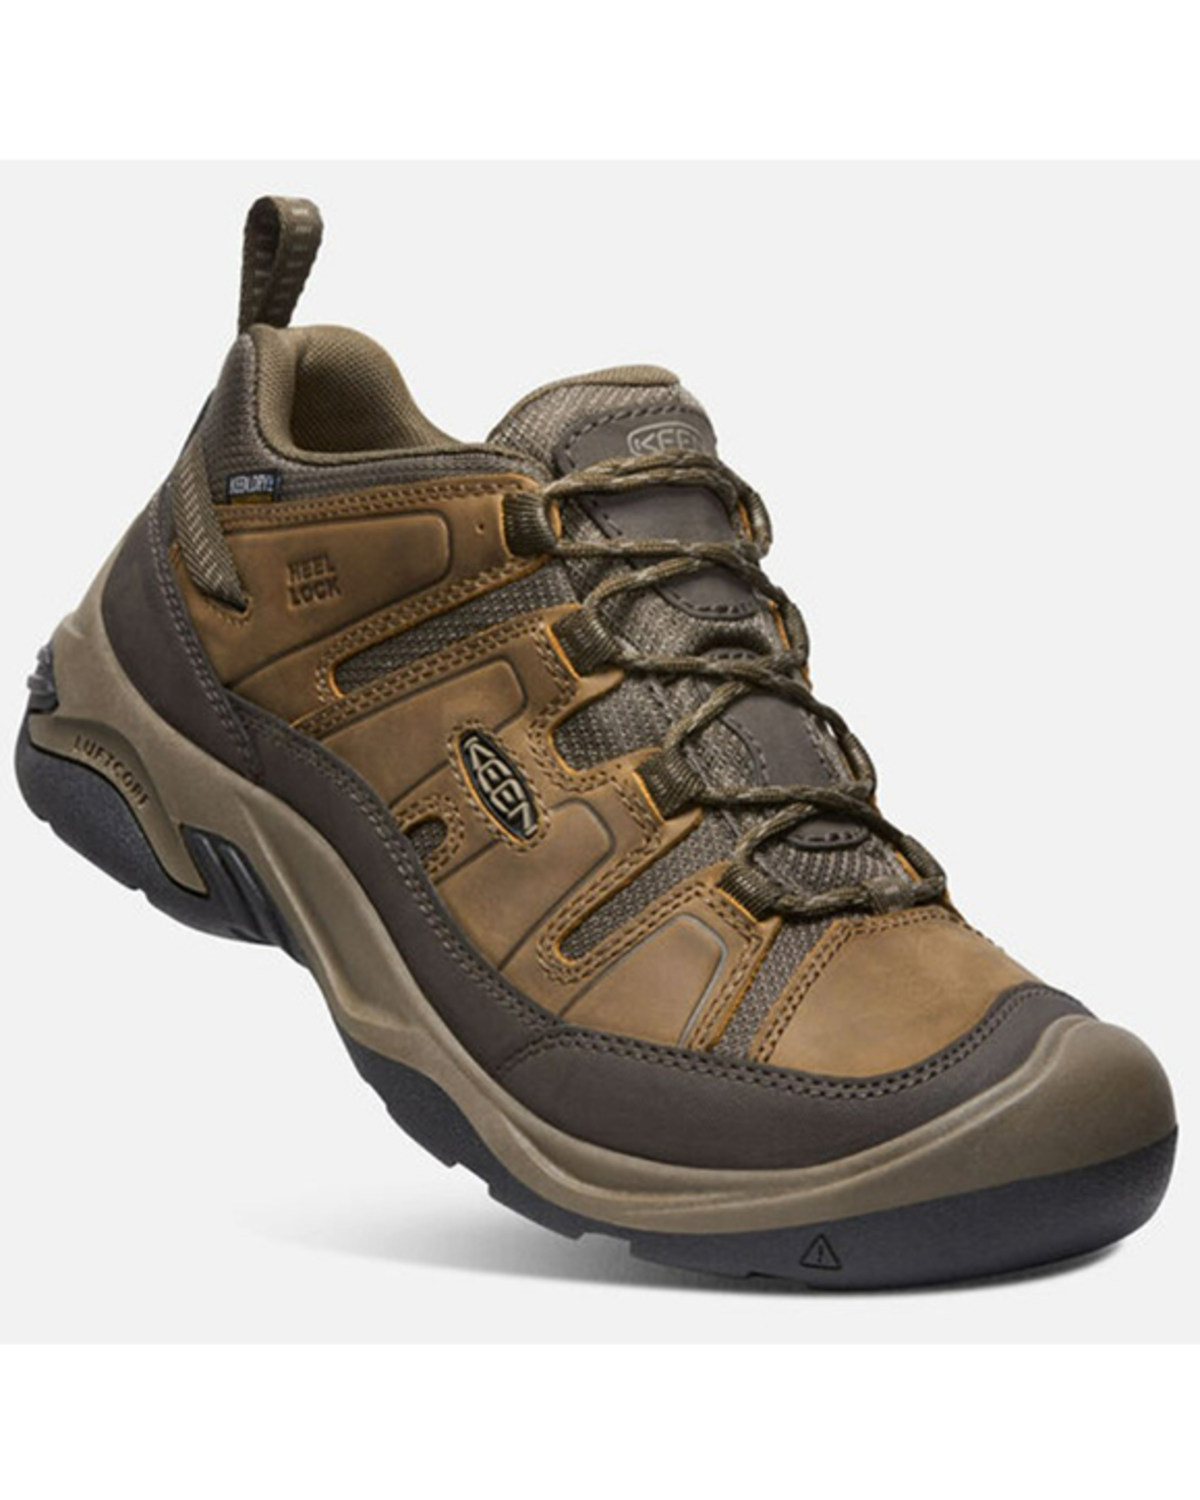 Keen Men's Circadia Waterproof Lace-Up Hiking Shoes